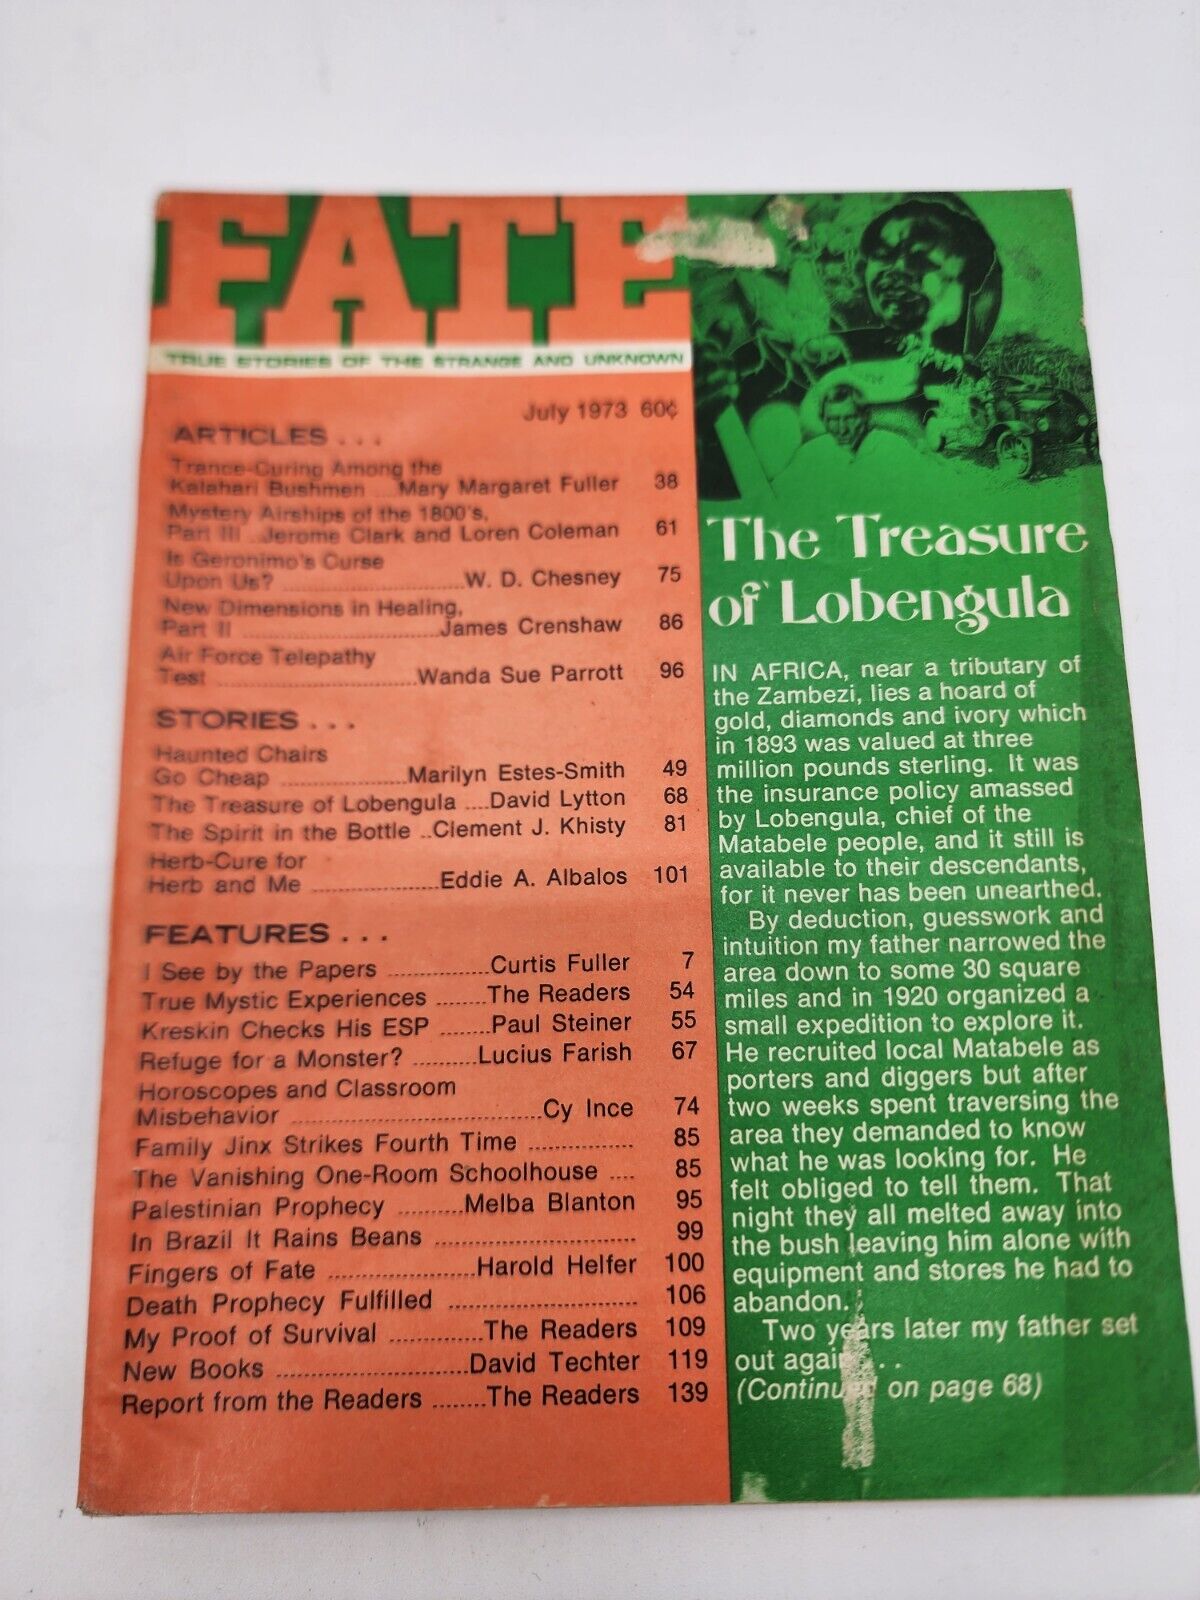 Fate Digest/Magazine Vol. 26 #7 Issue 280 July 1973